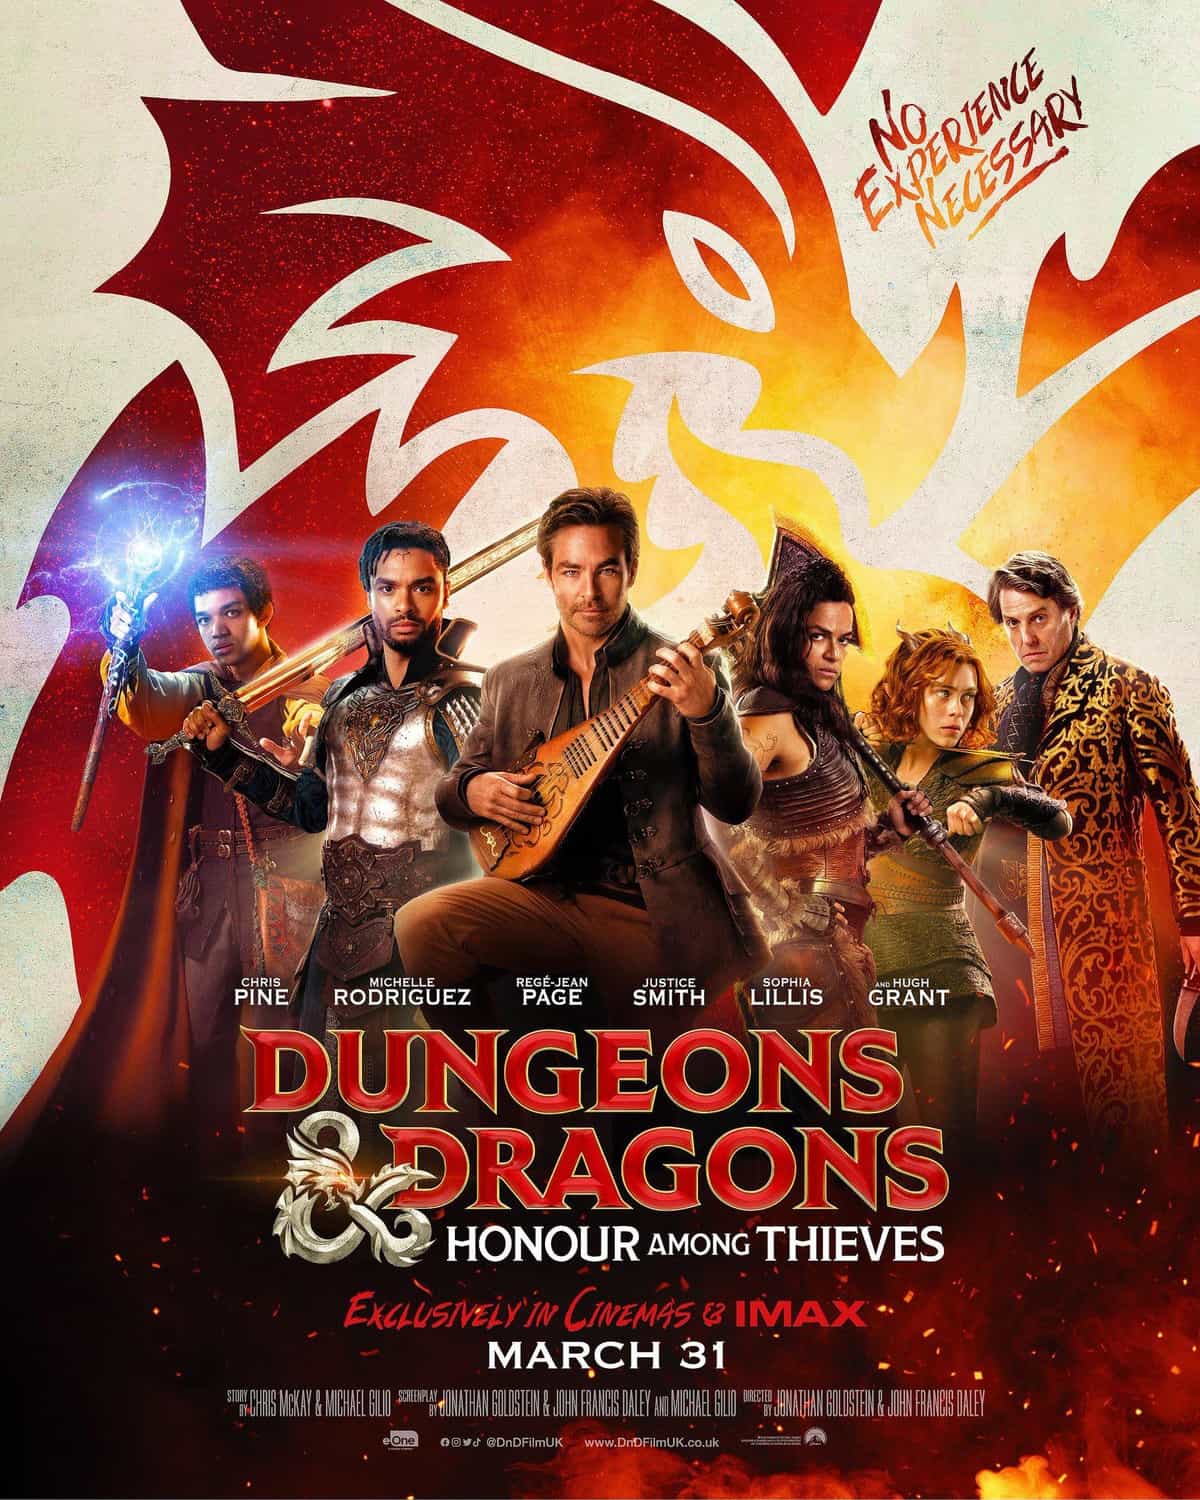 New poster released for Dungeons and Dragons: Honor Among Thieves starring Chris Pine - movie UK release date 3rd March 2023 #dungeonsanddragonshonoramongthieves